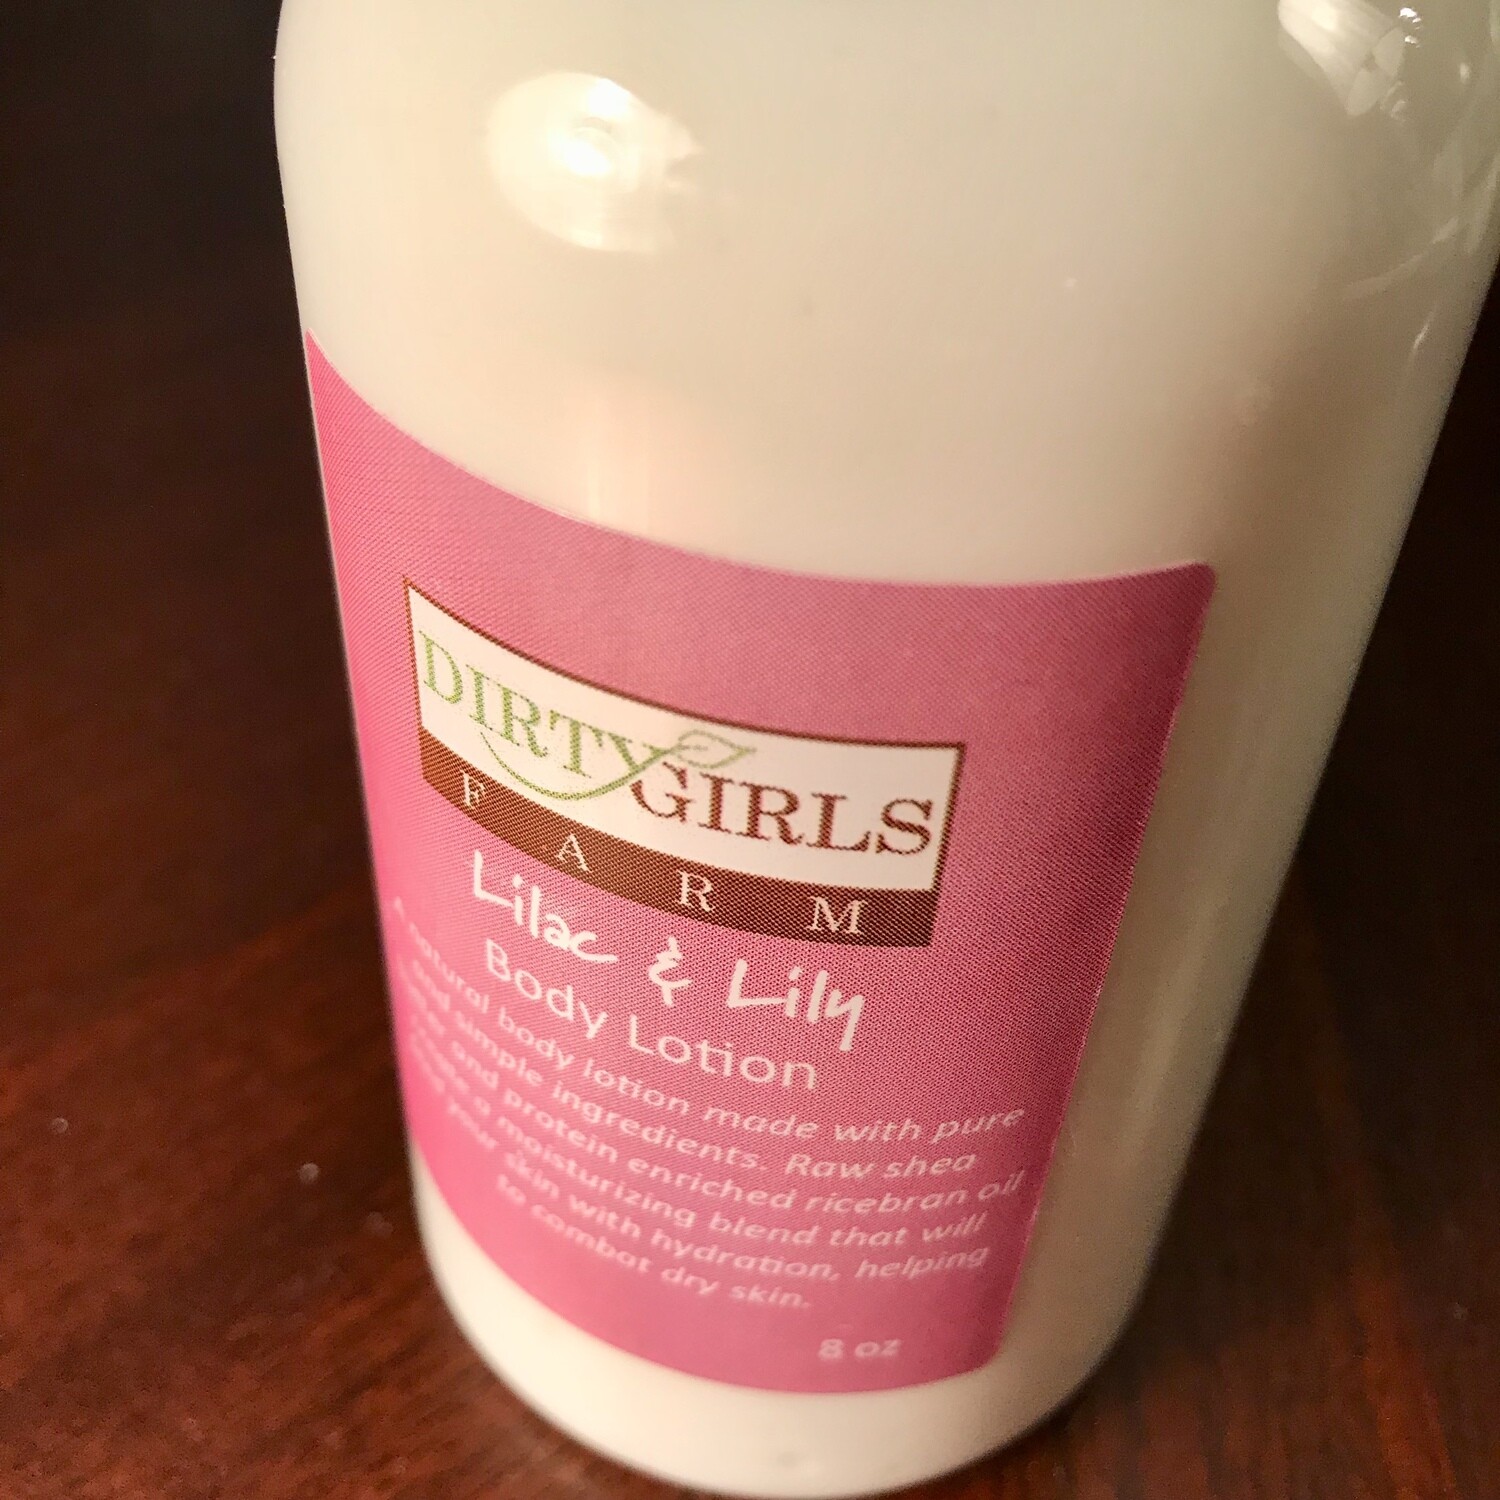 Lilac & Lily Body Lotion